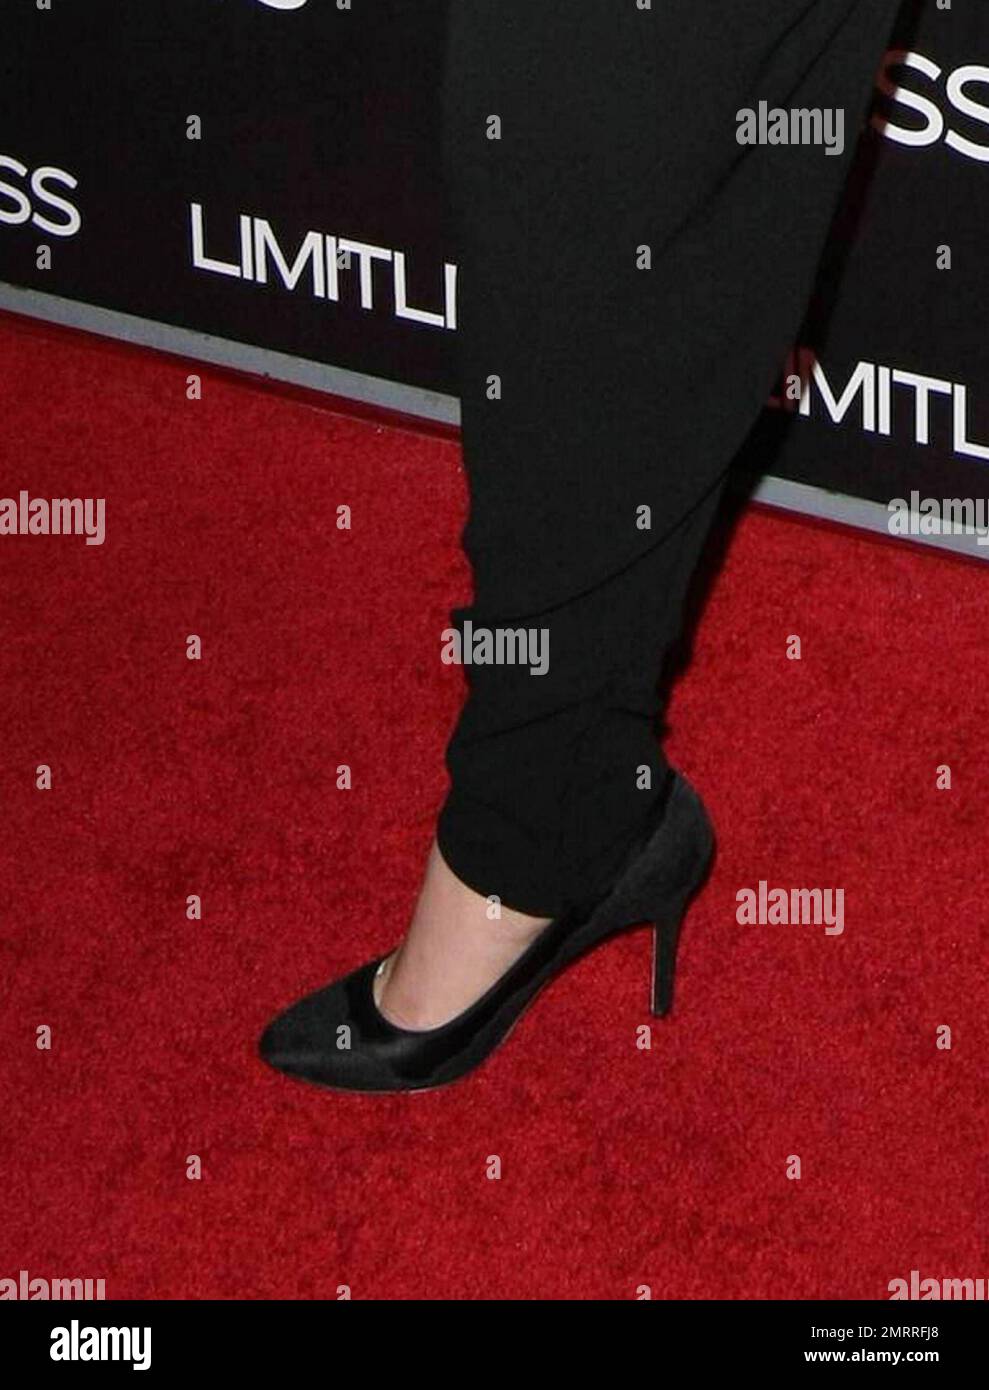 In trendy tapered black trousers tucked in to her black high heels and  suspenders Abbie Cornish poses for photographers on the red carpet at the  premiere of "Limitless" held at ArcLight Cinemas